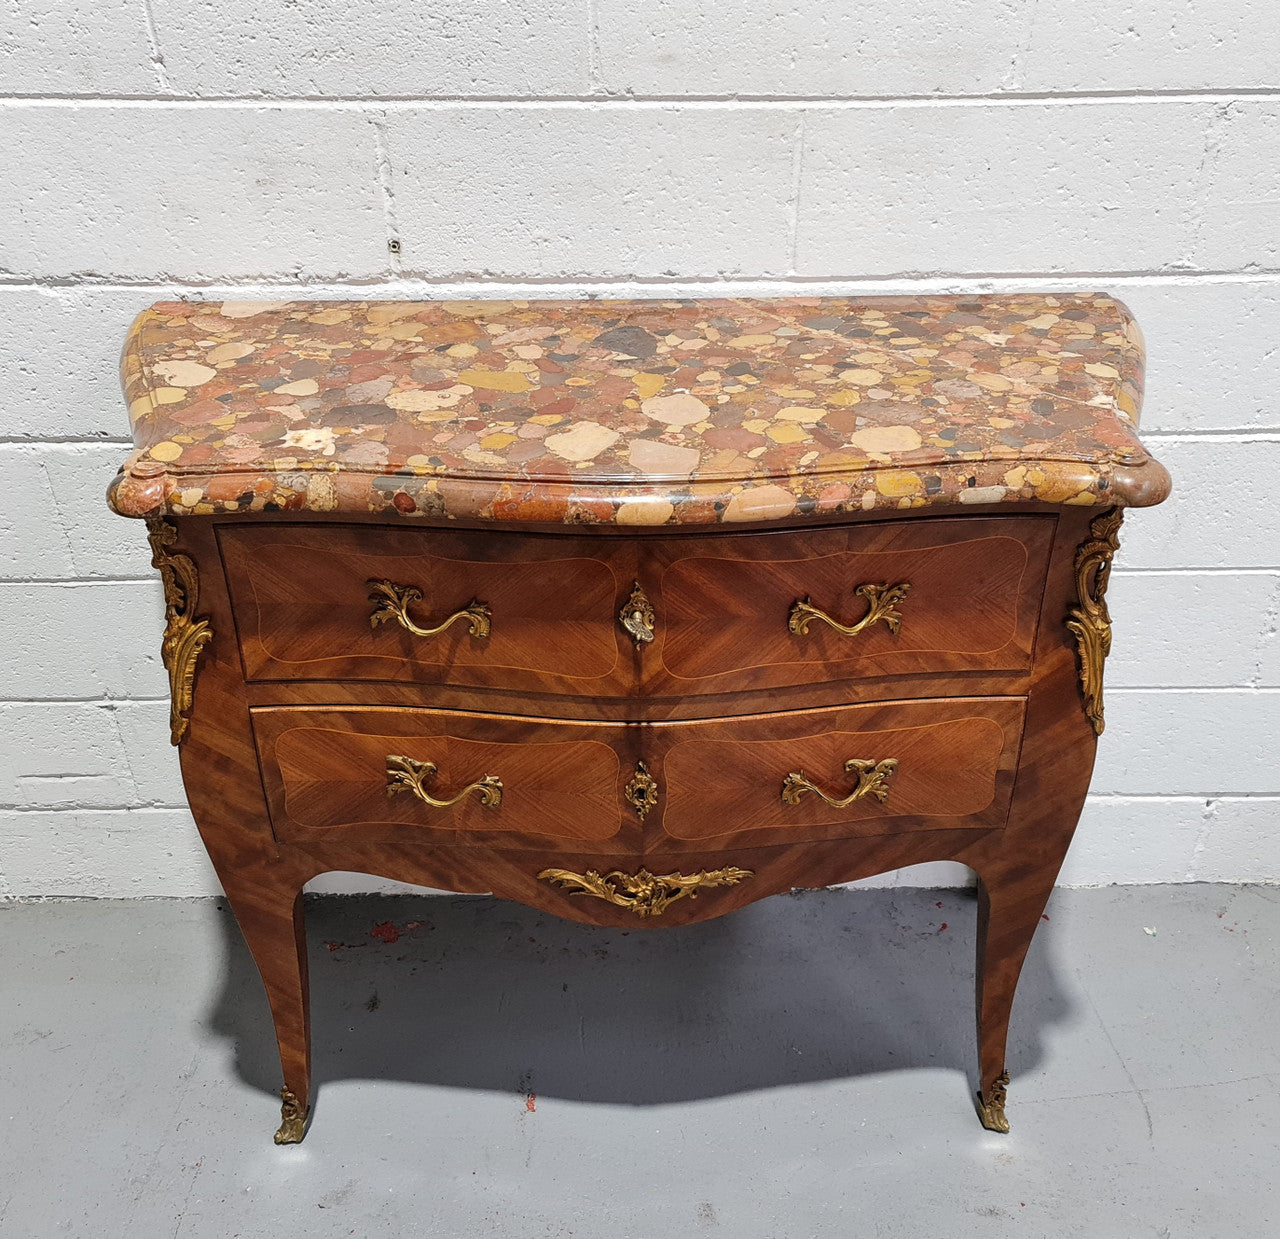 High quality French Mahogany Louis XVth style marble top commode. It has an eye catching marble top and is signed on body "J Bamelis". In very good original detailed condition.